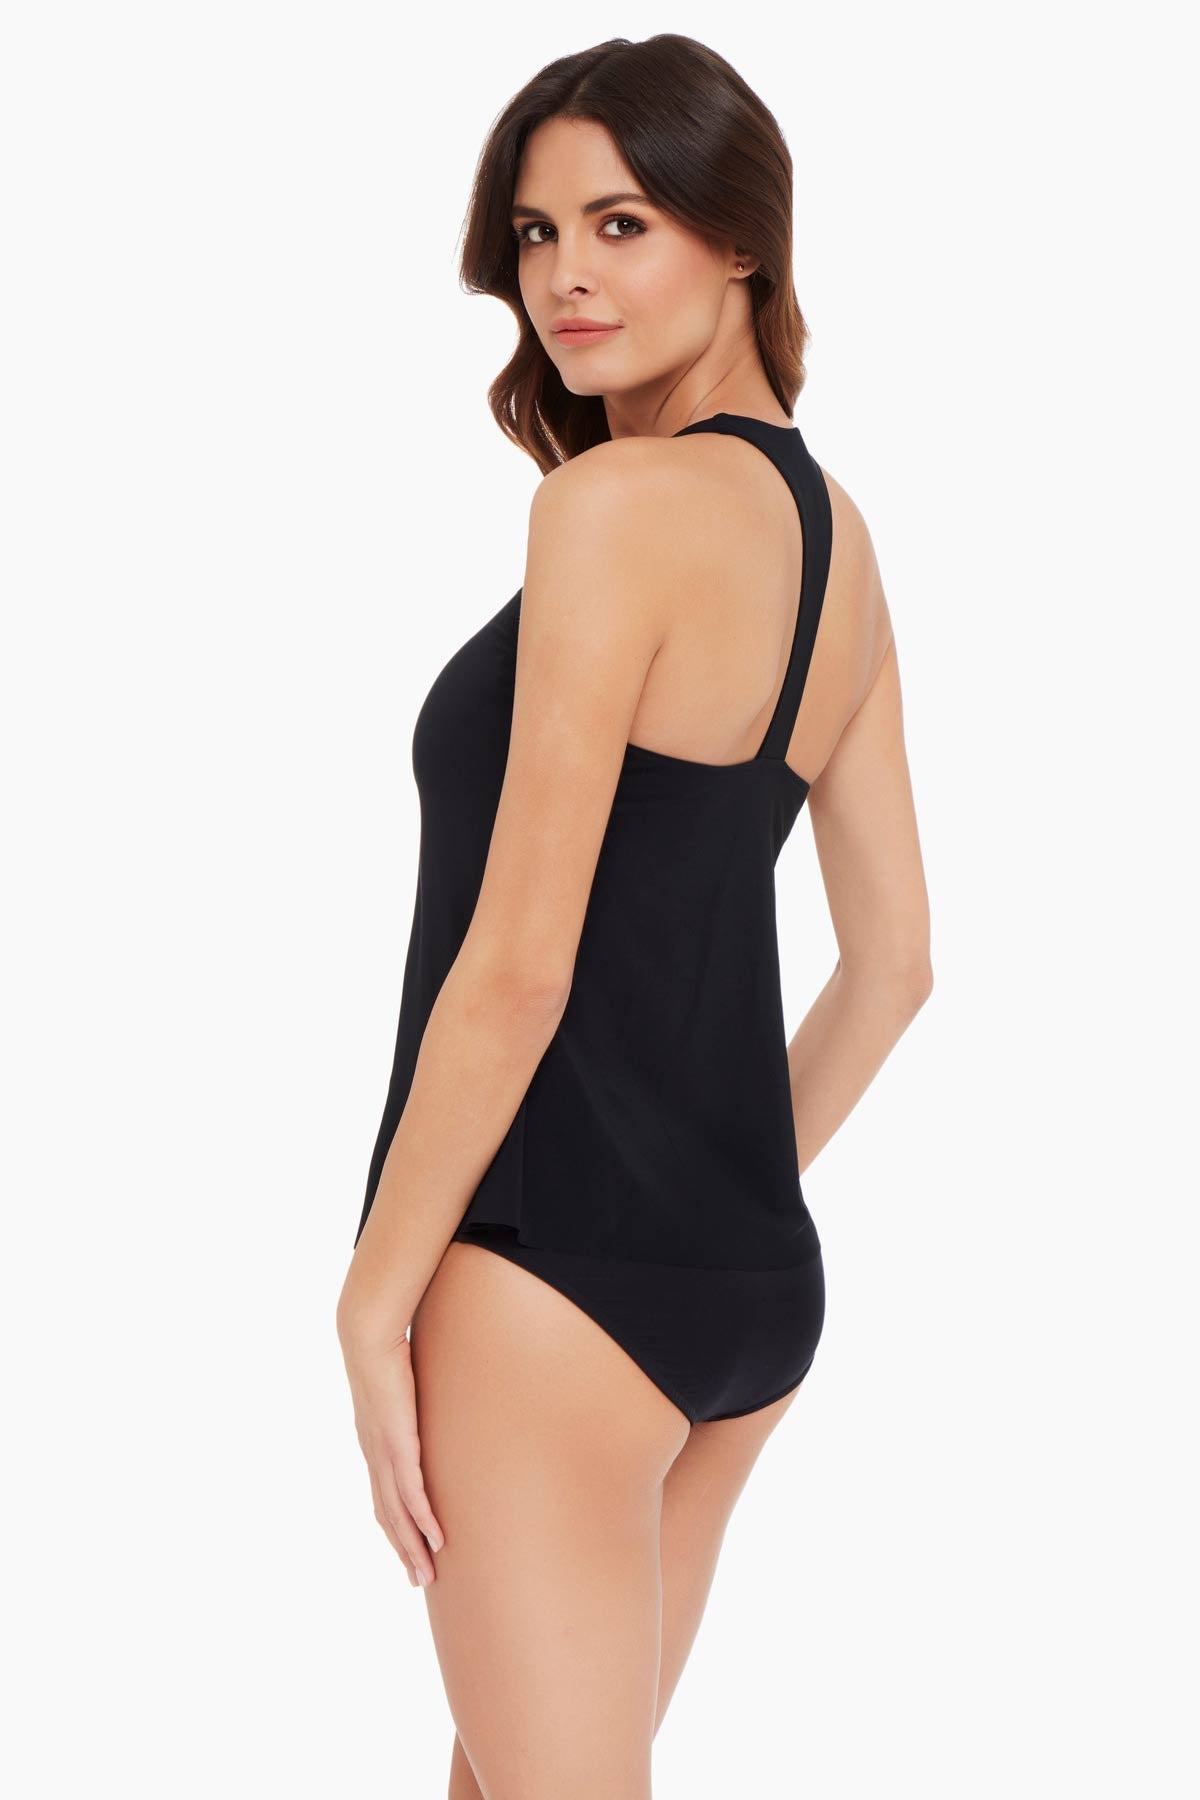 MAGICSUIT DUNGAREES TAYLOR TANKINI TOP  Just 1 More Bag - Your Bag  Know-It-Alls